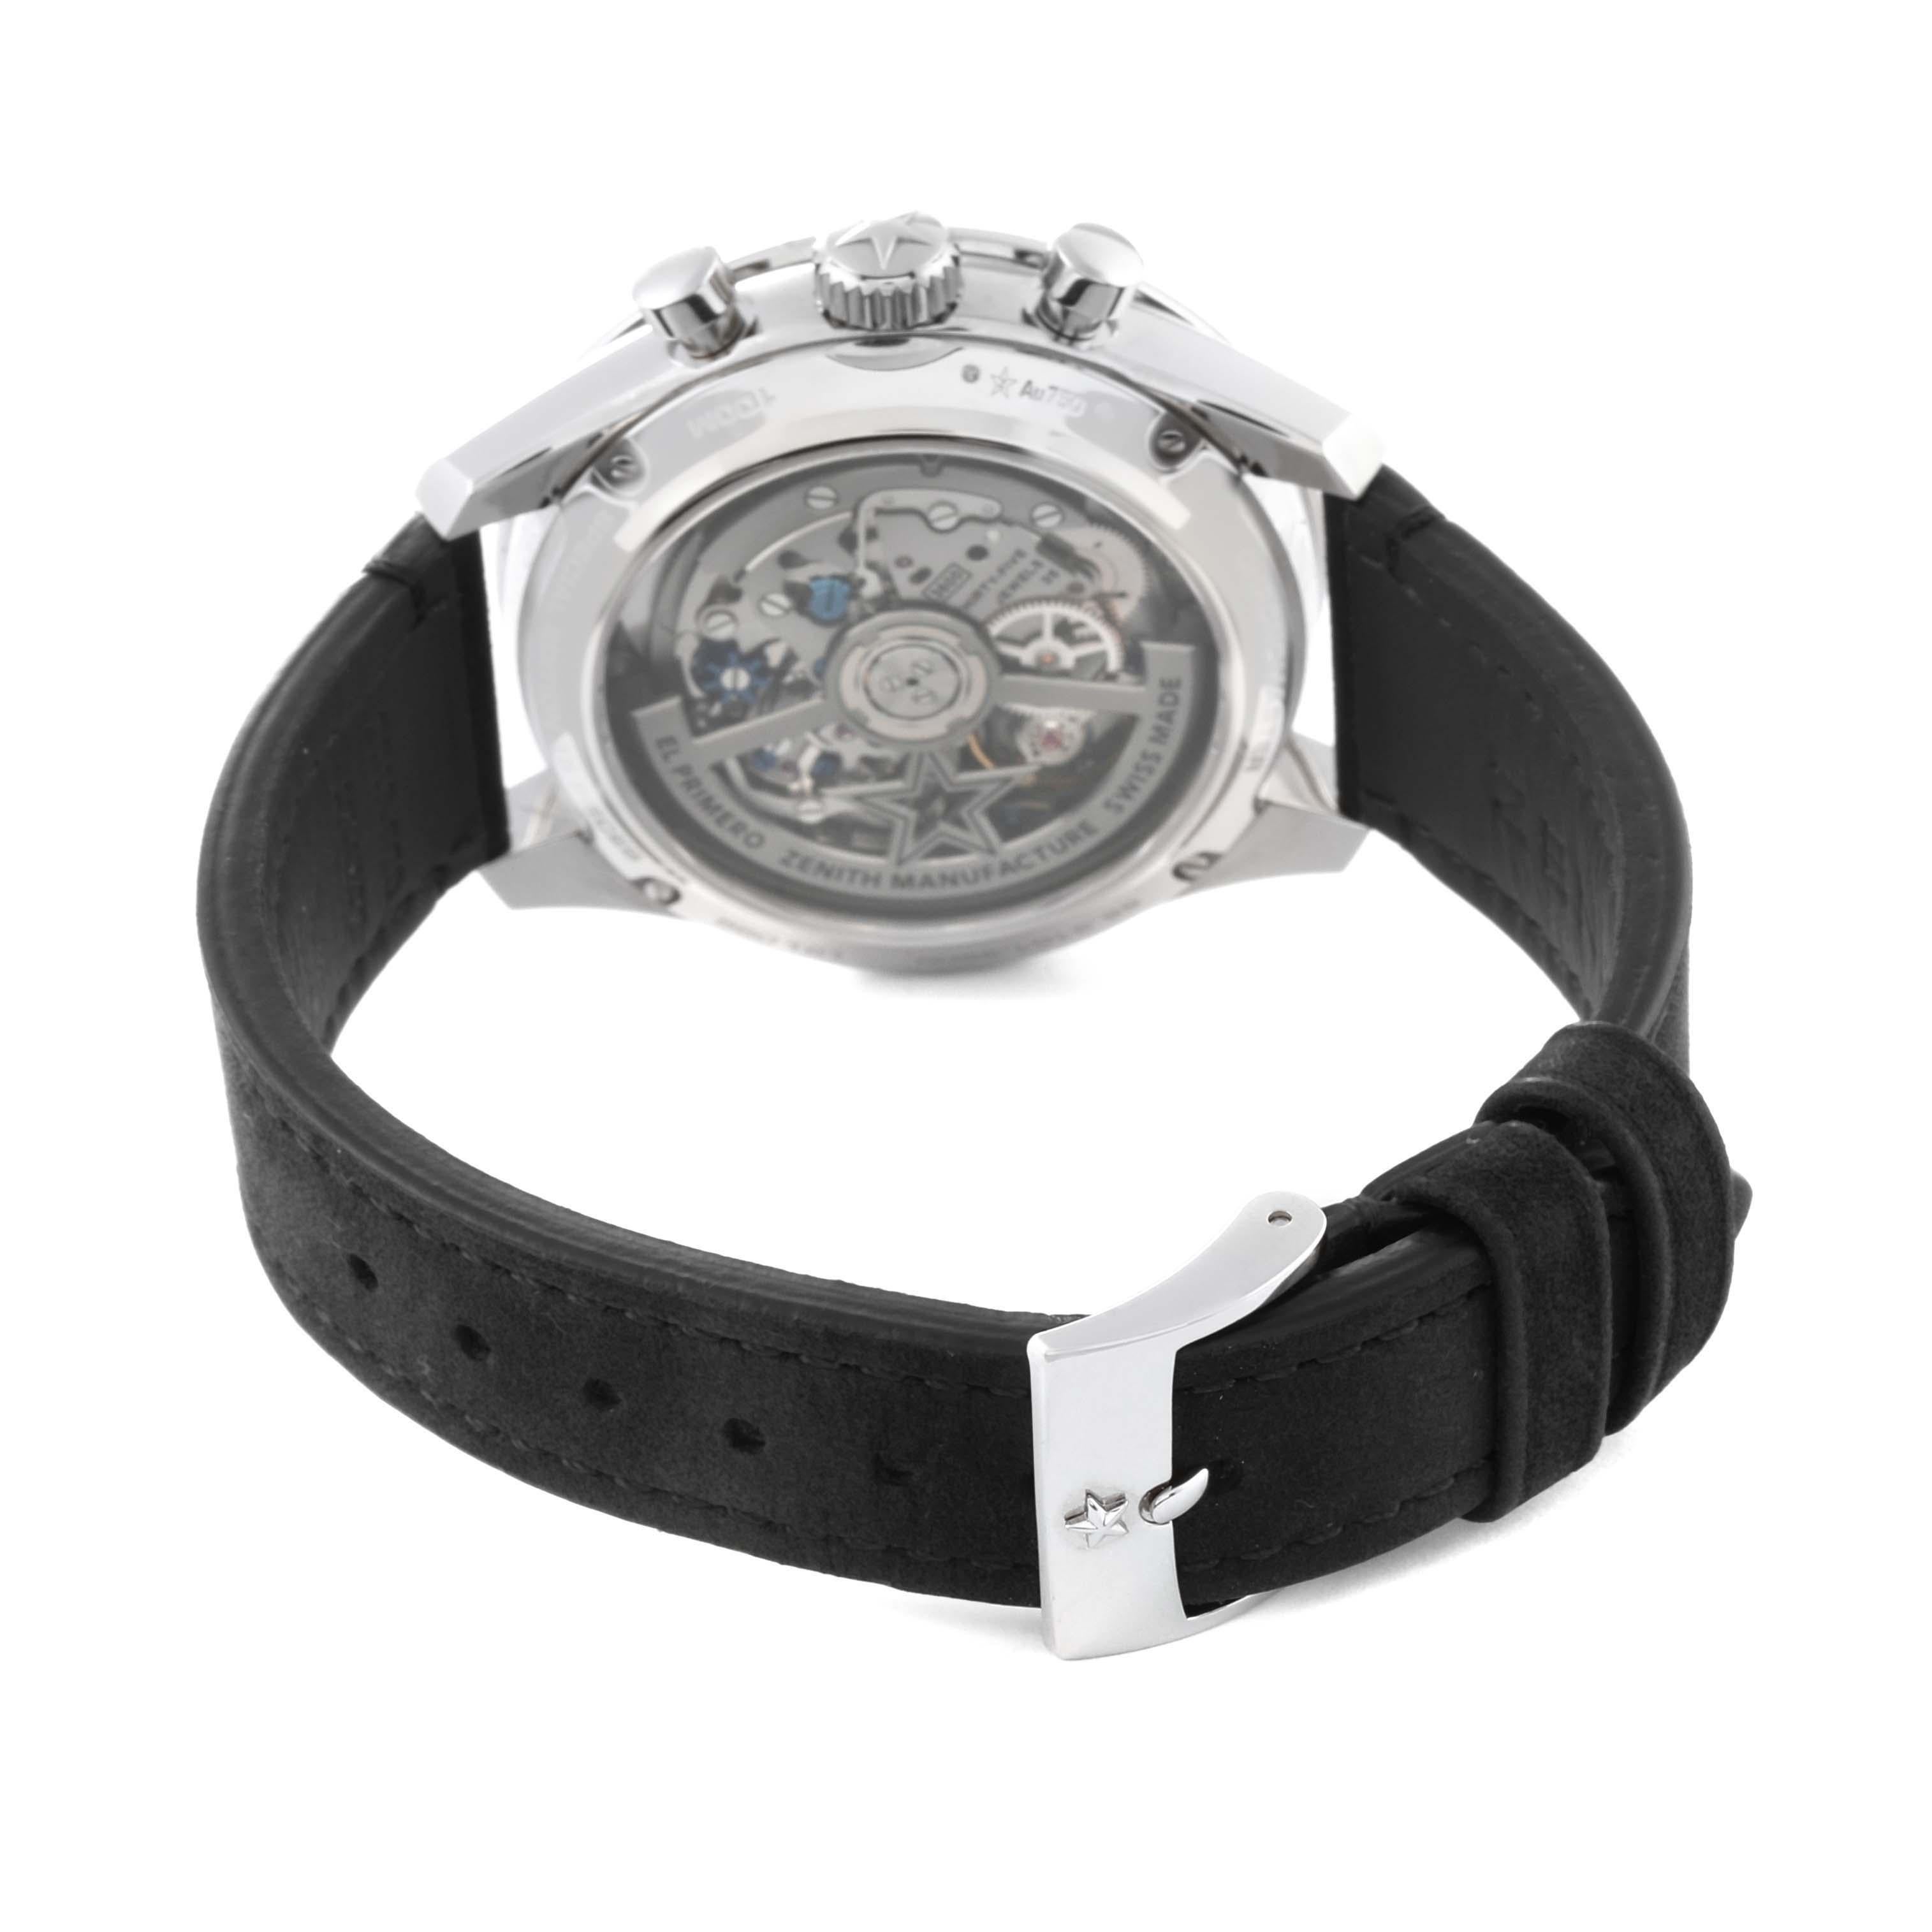 Men's Zenith Chronomaster Sport Limited Edition White Gold Watch 65.3101.3600 Box Card For Sale